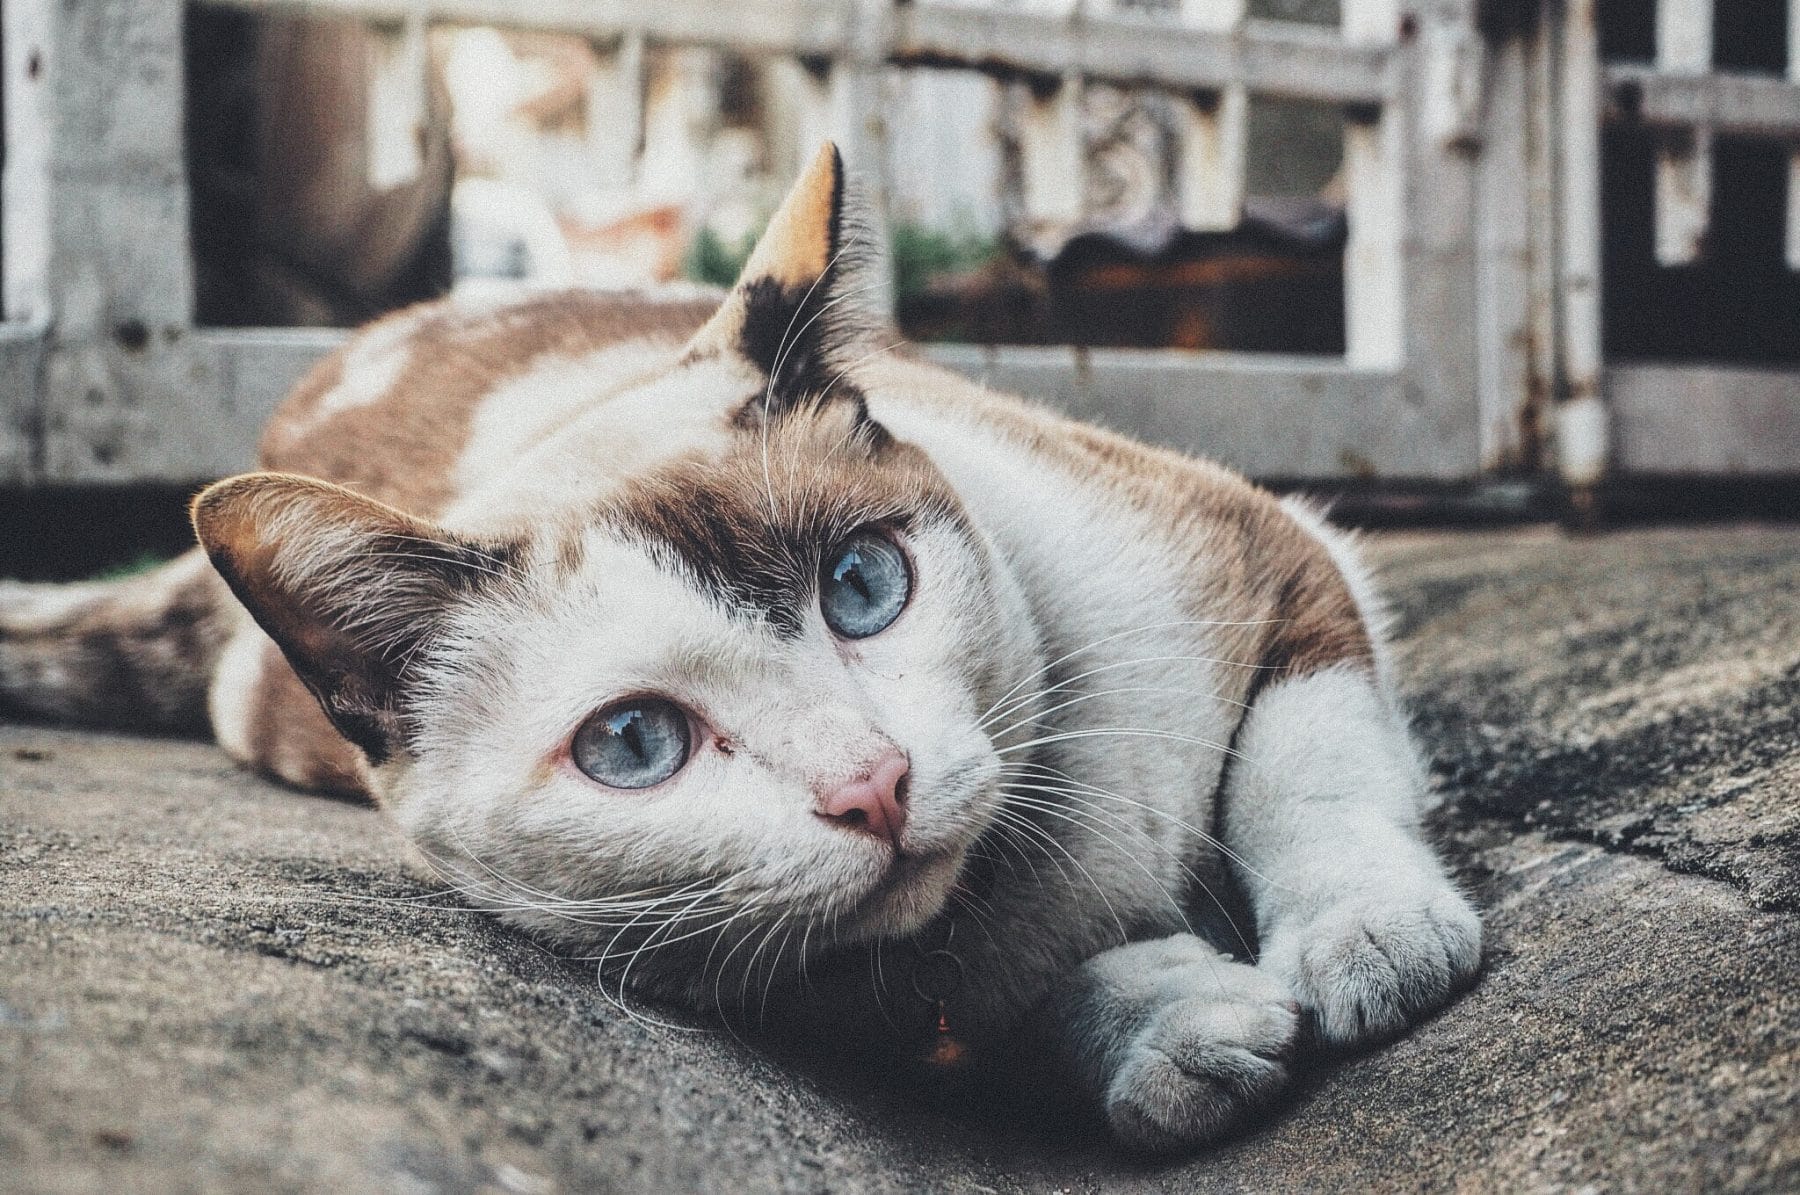 A Japanese Cat Island With More Than 200 Cats (Yes, You